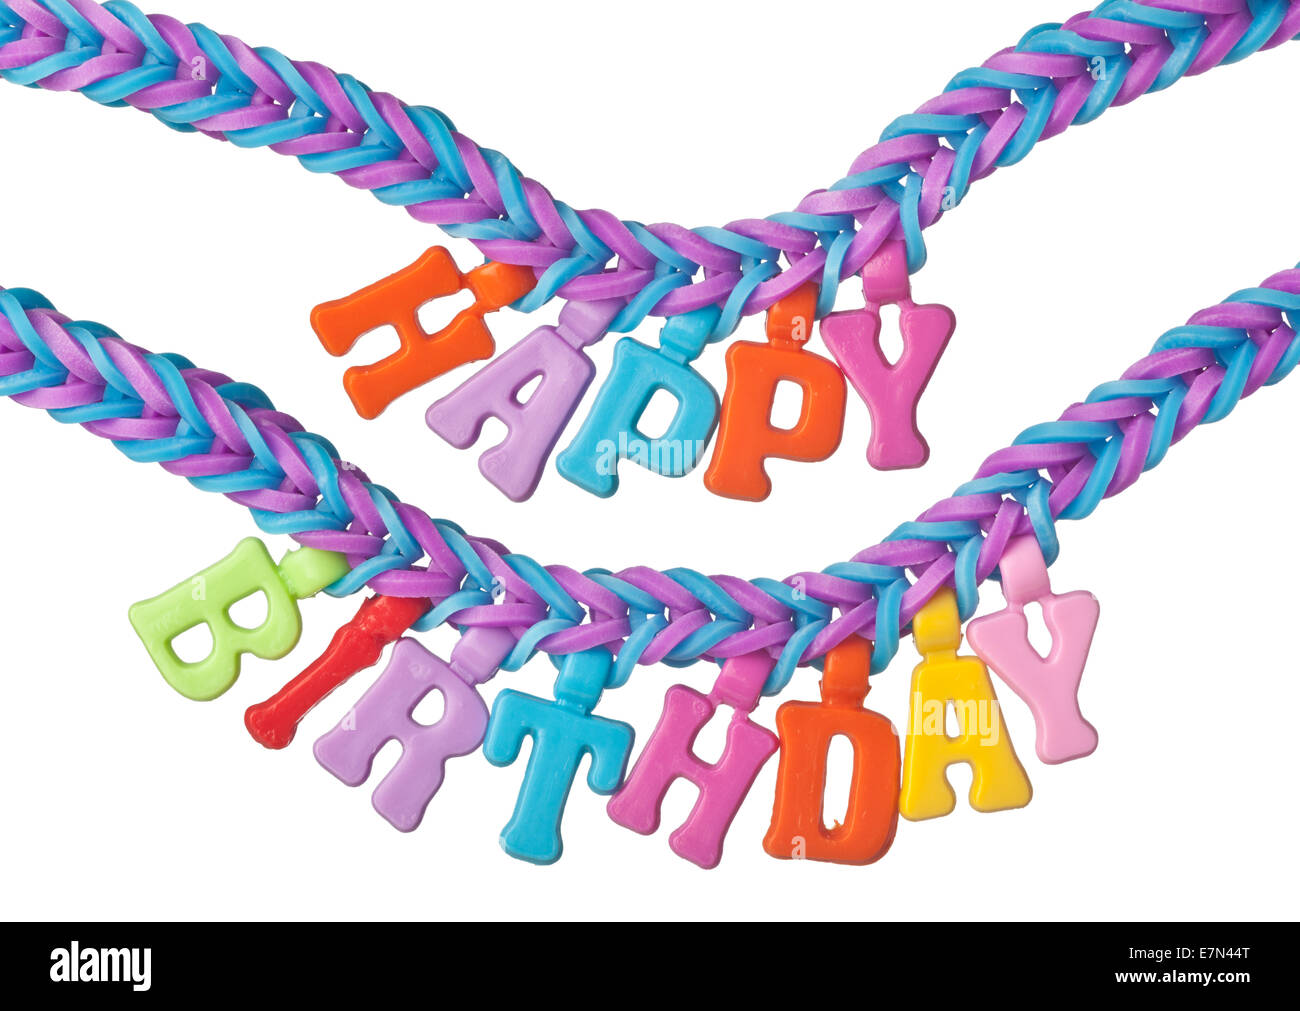 Bracelet formed using colorful rubber bands with the words HAPPY BIRTHDAY isolated on white background Stock Photo